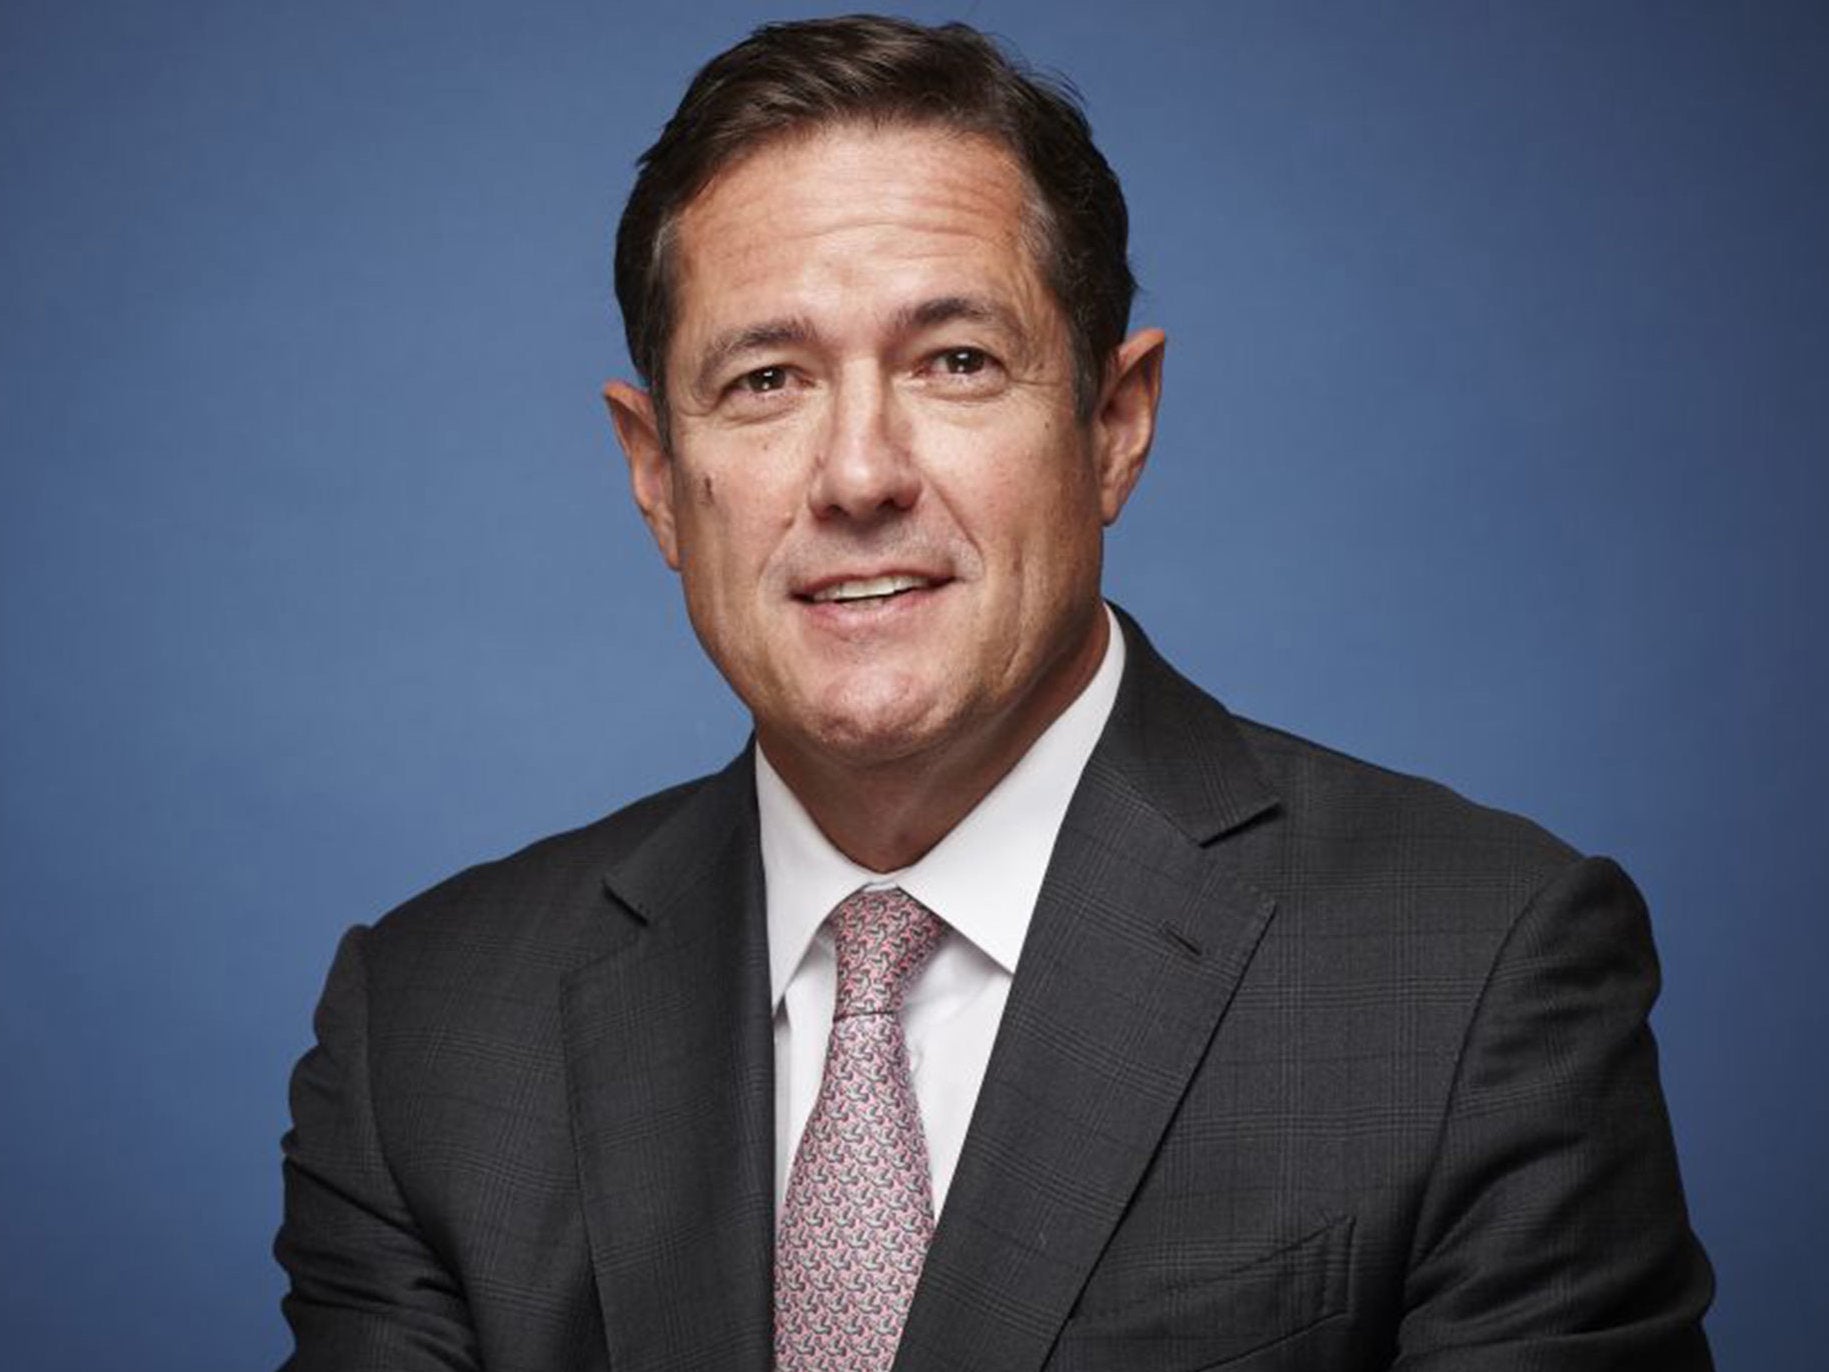 Barclays boss Jes Staley said selling its African operations would boost the dividend